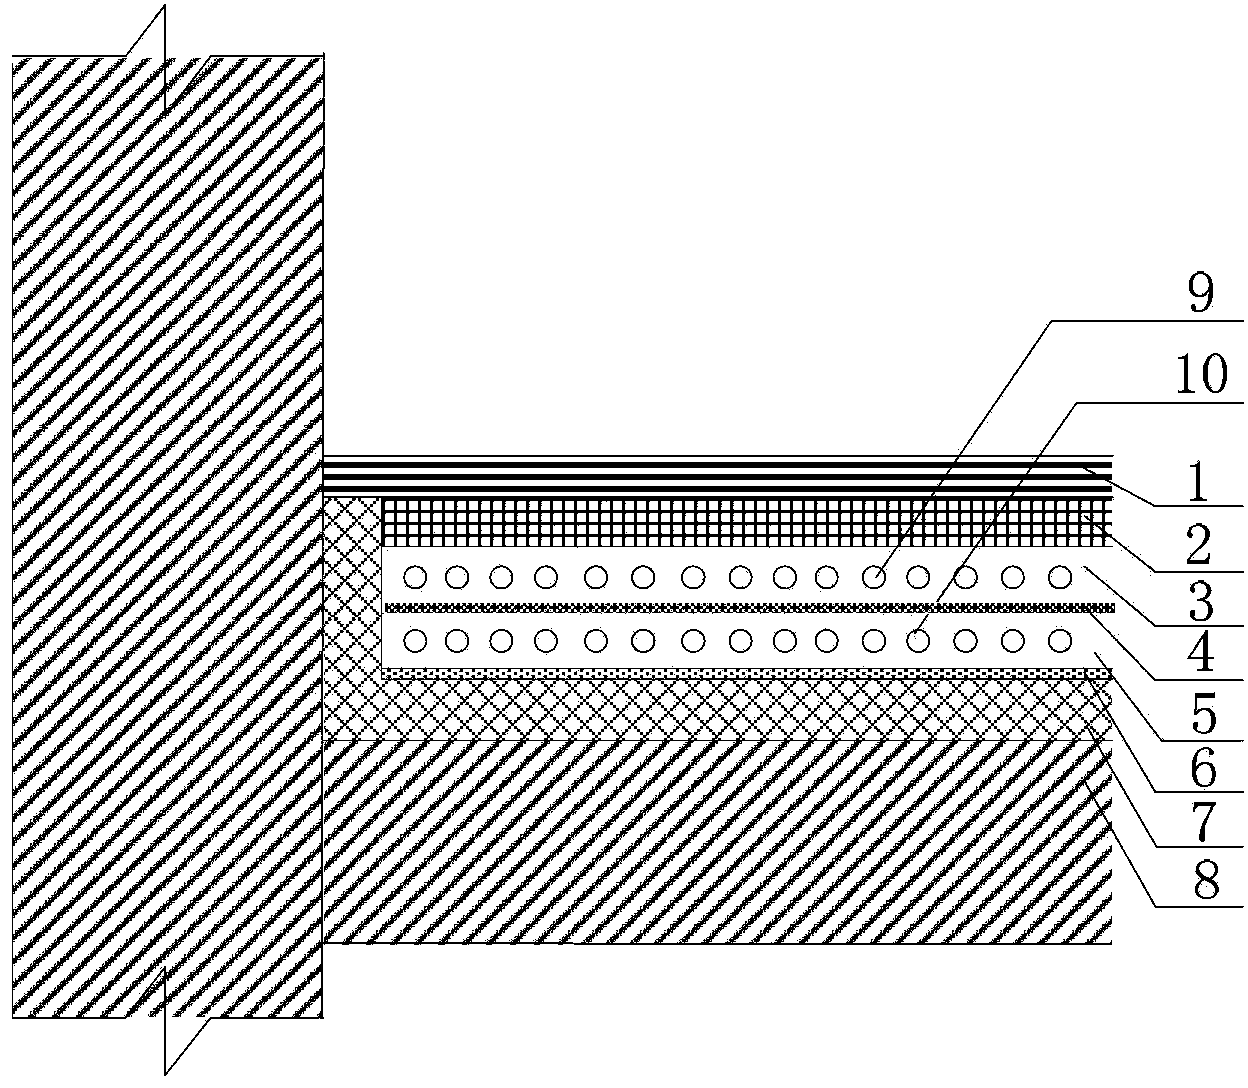 Cooling-heating-integrated double-capillary-tube-layer phase-change energy storage floor terminal device and application system